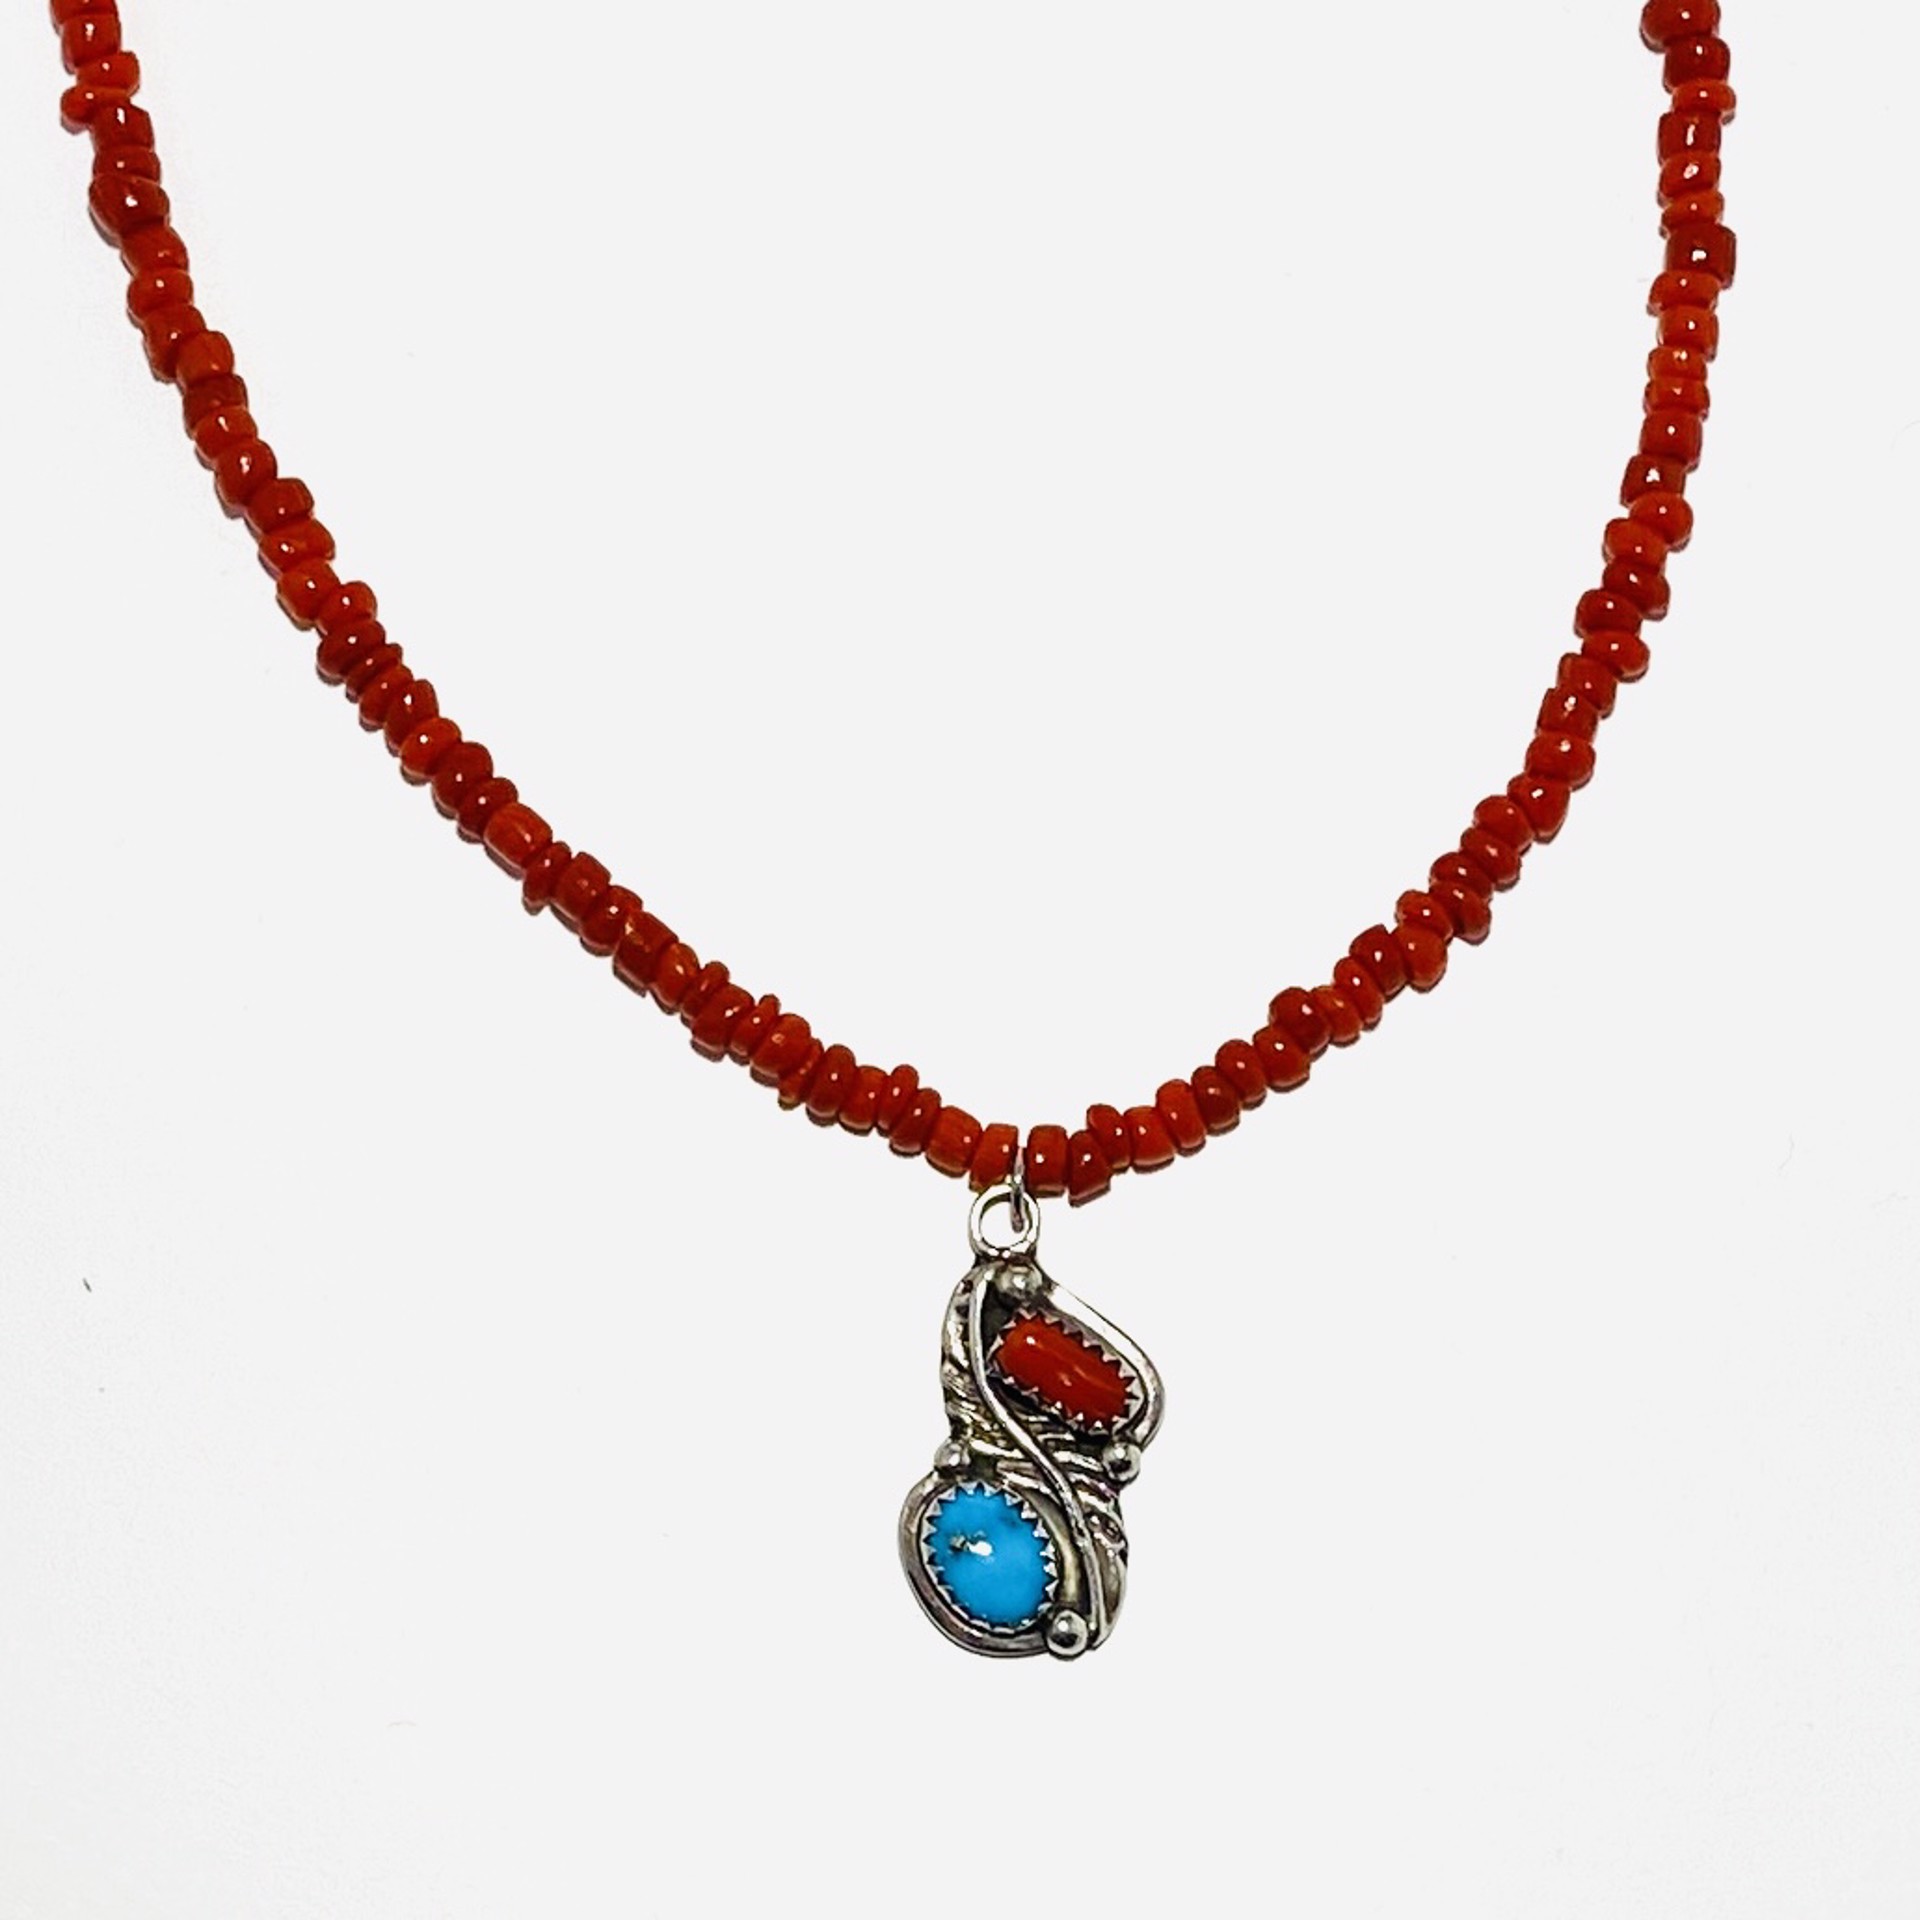 Coral and Turquoise Pendant on Coral Bead Necklace by Nance Trueworthy